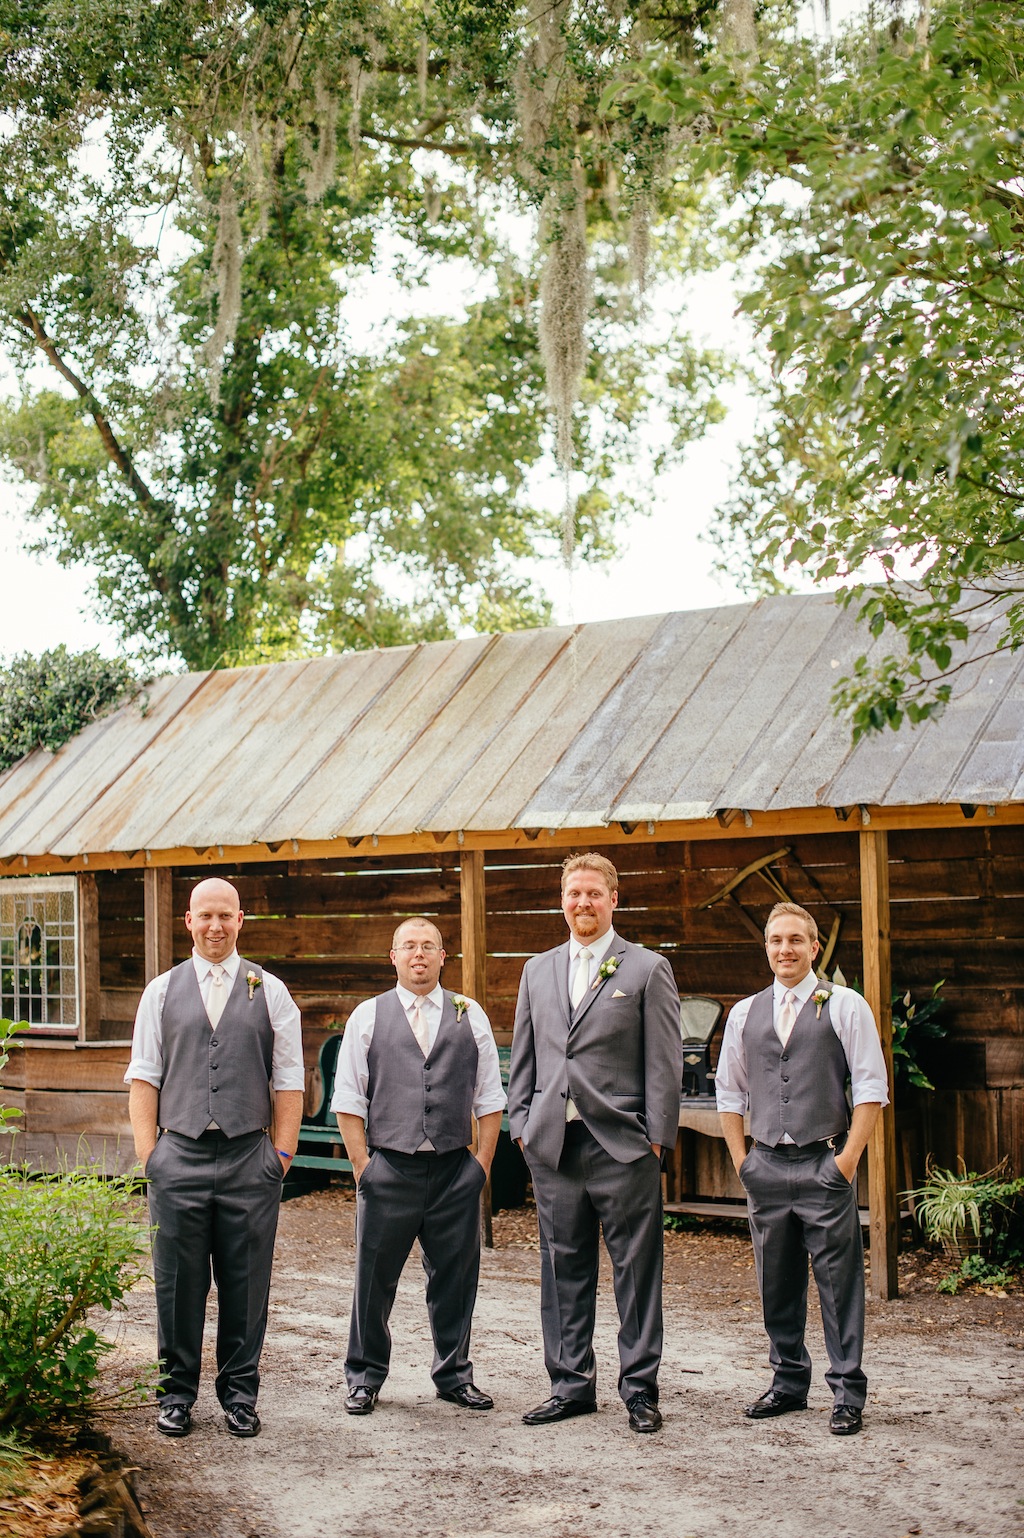 Cross Creek Ranch Wedding near Tampa Bay, Fl - Rustic Rose, Burlap and Lace by Lakeland Wedding Photographer Sunglow Photography (6)